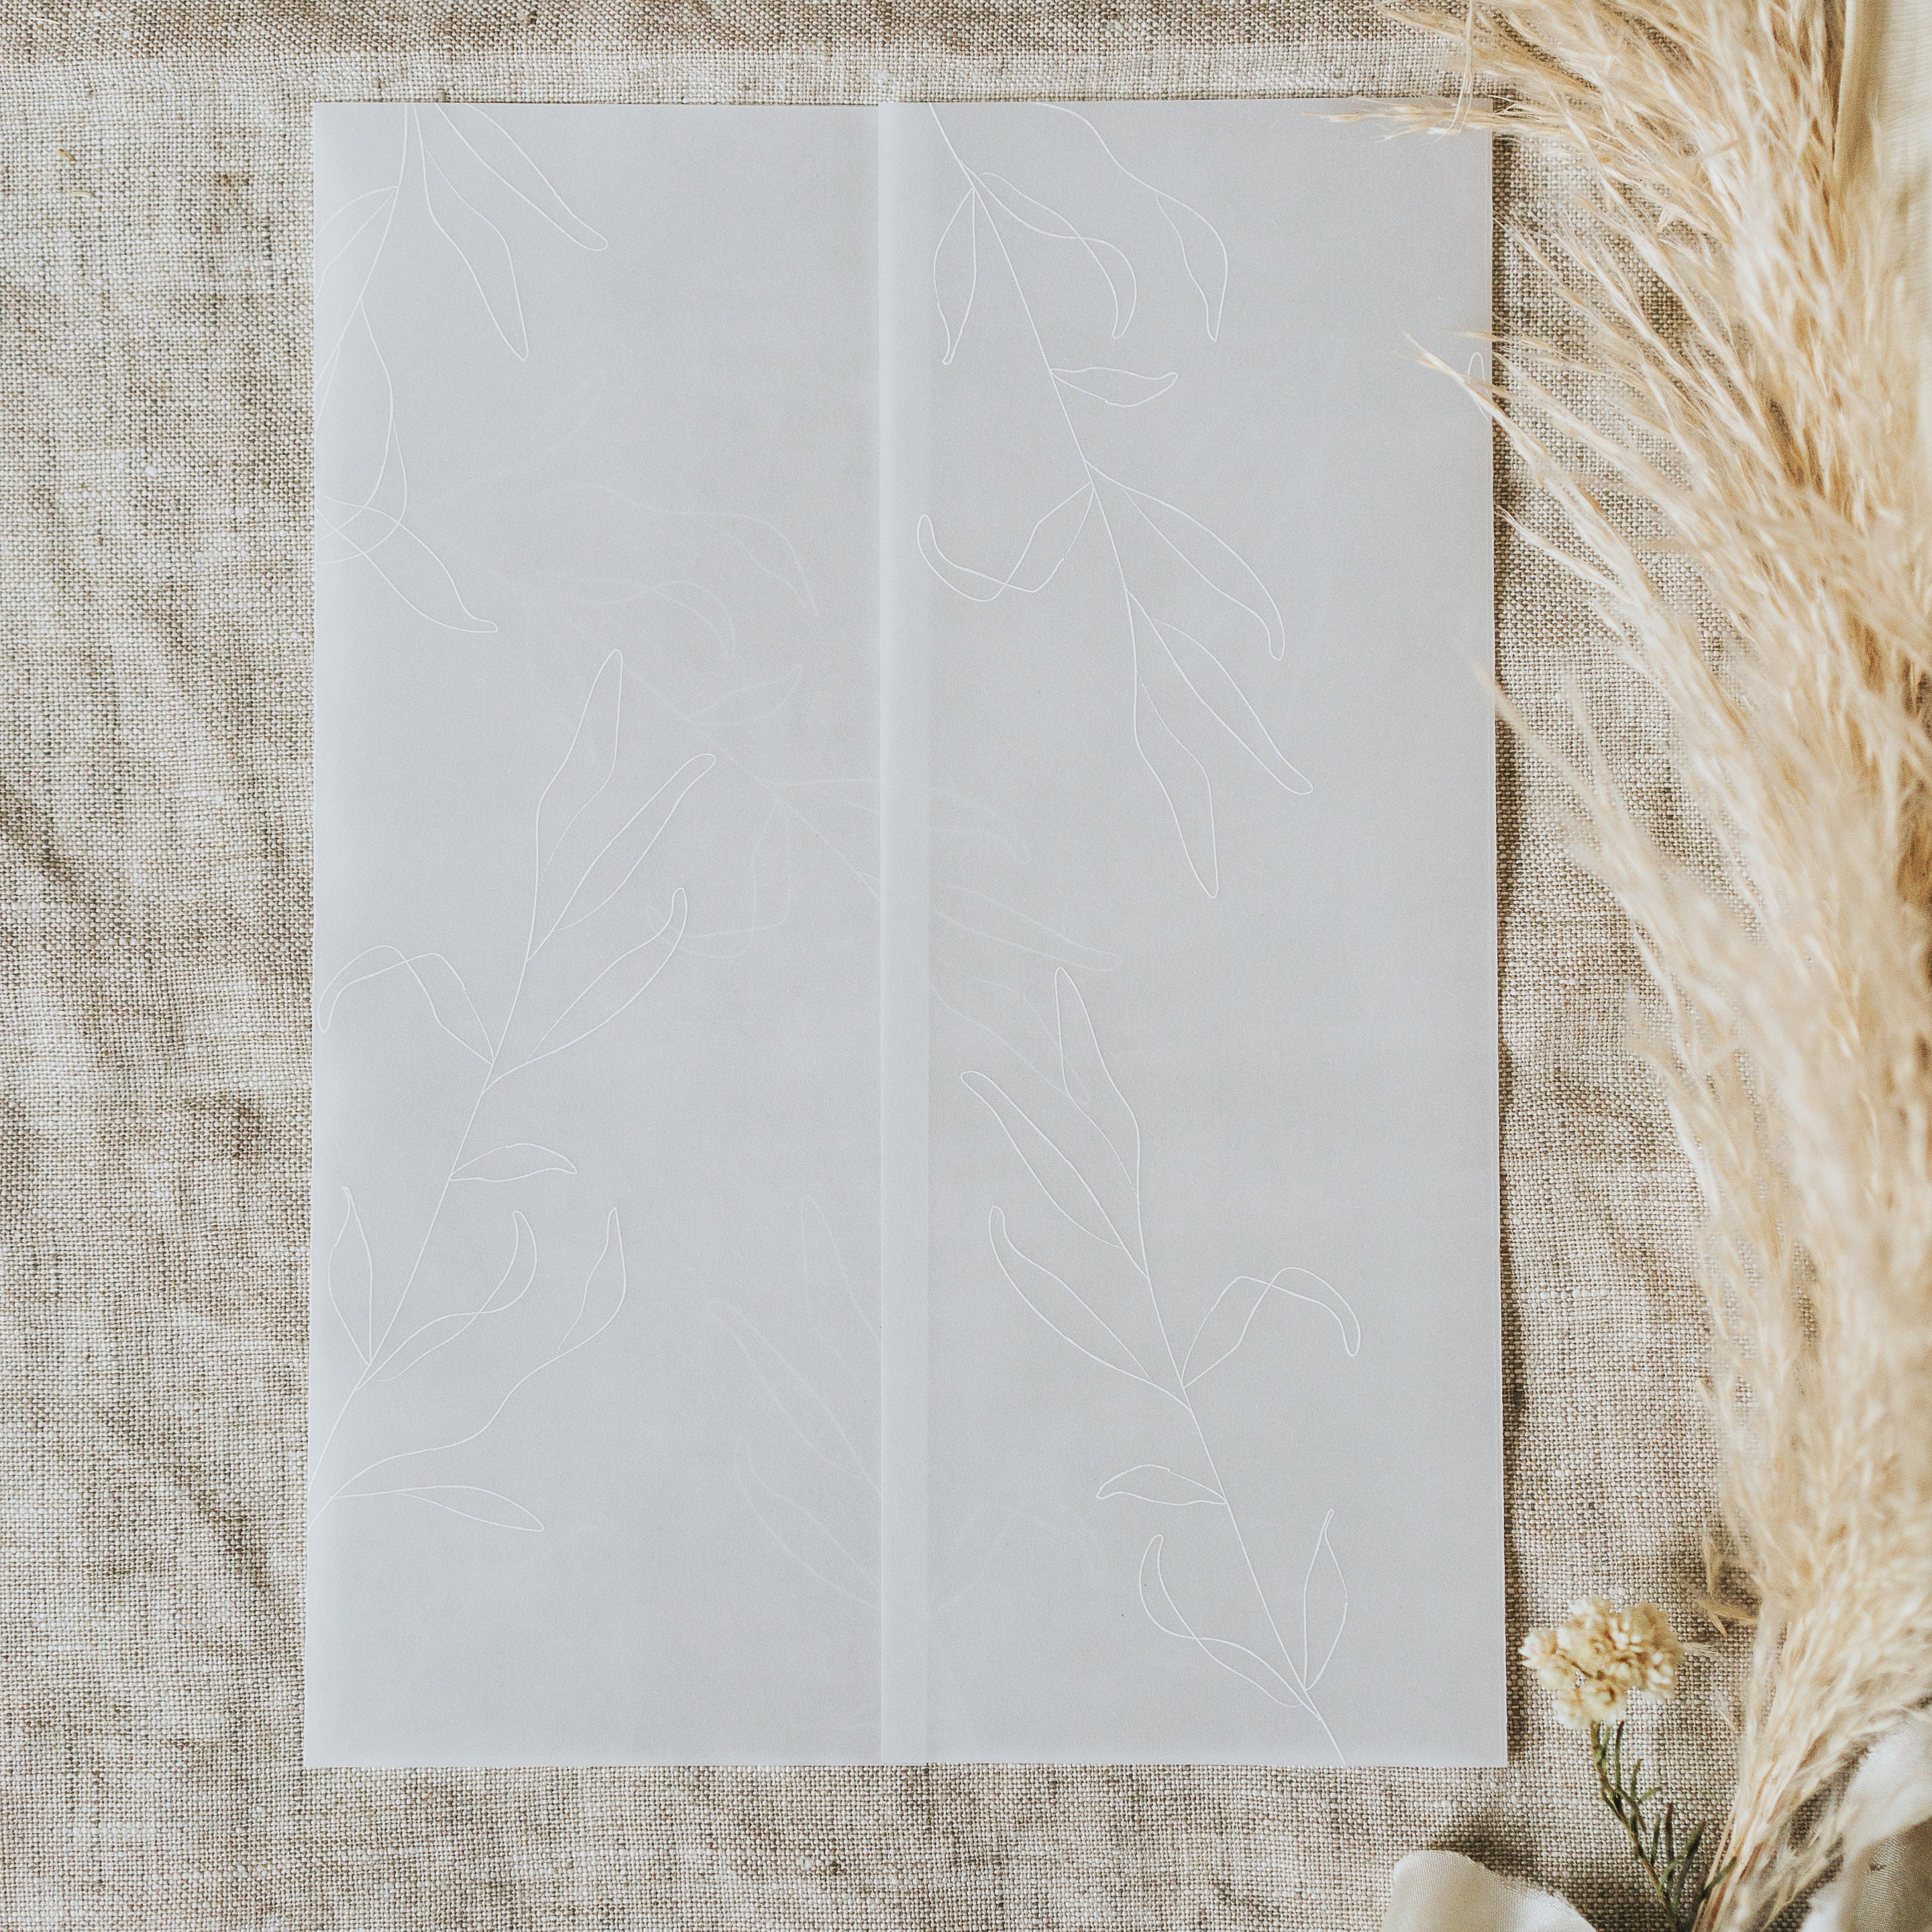 Floral Vellum Jackets For A5 Wedding Invitations - Pre- Folded Translucent Wrap Invites Paper Sleeve With White Ink Lines